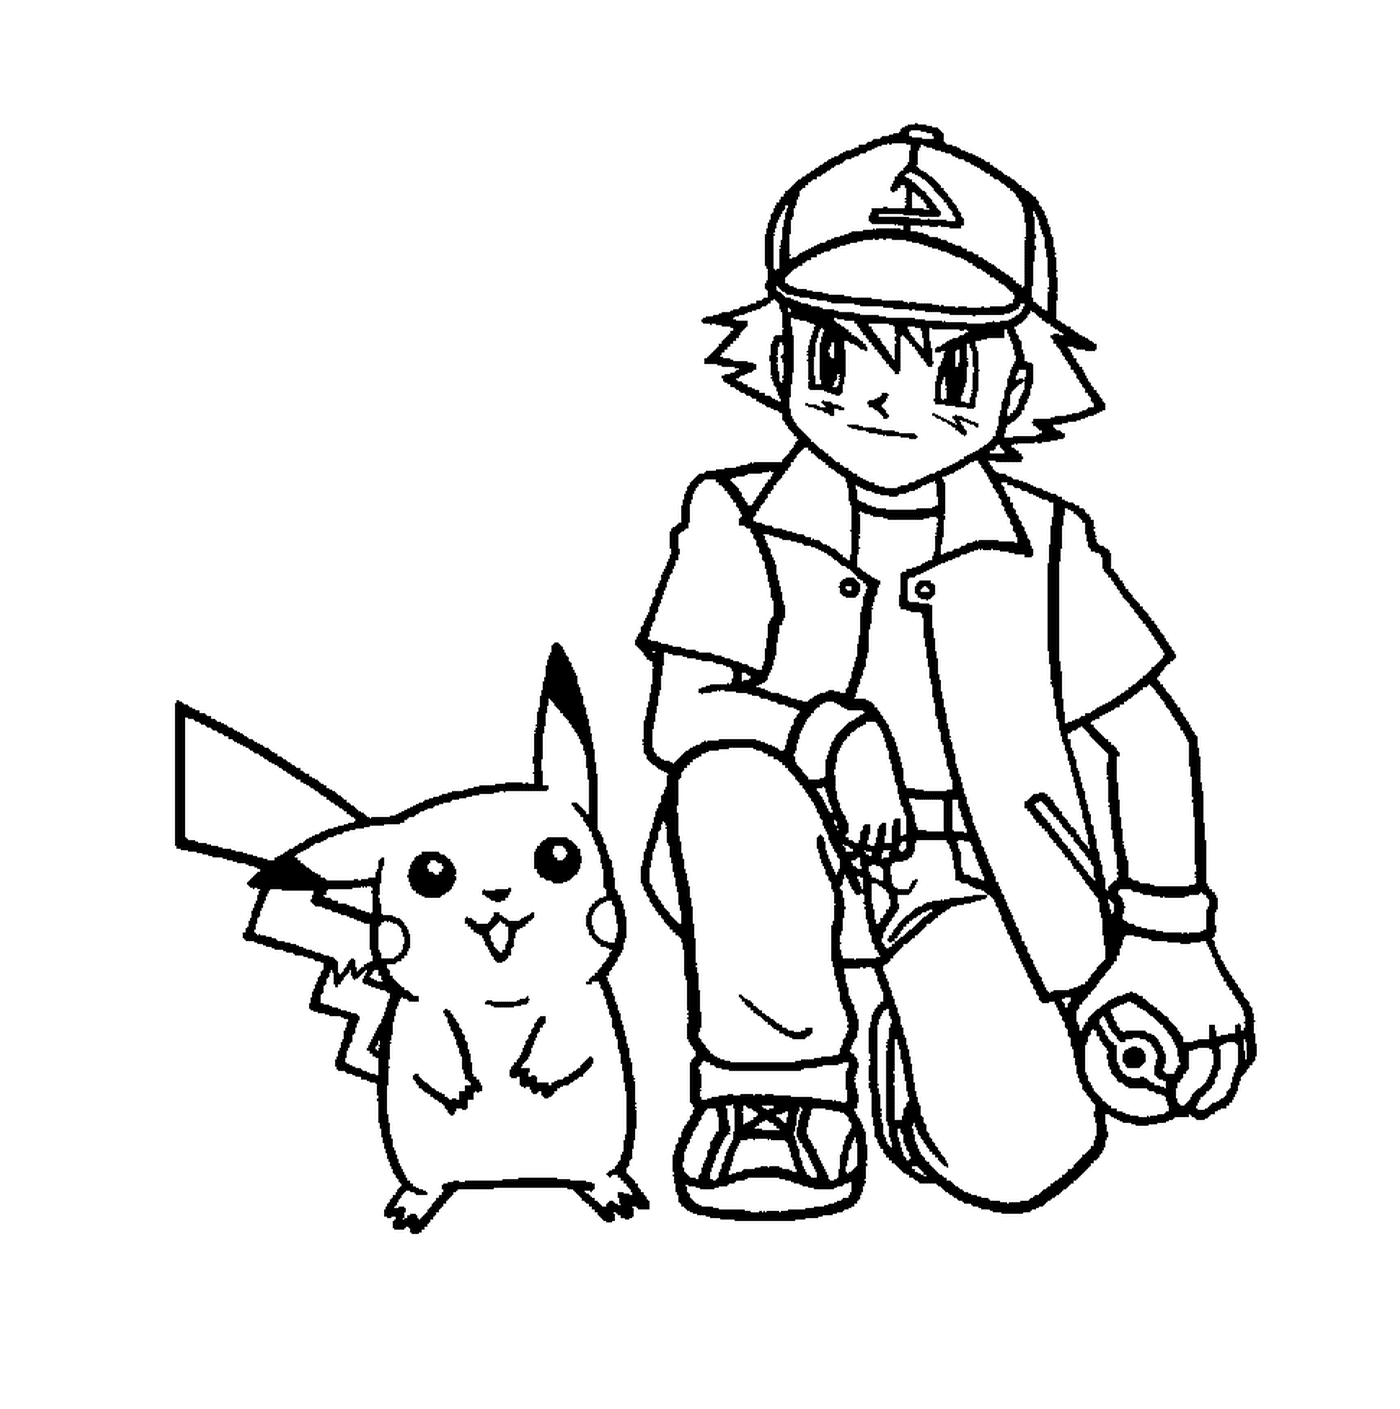  Sacha ready for adventure with Pikachu 